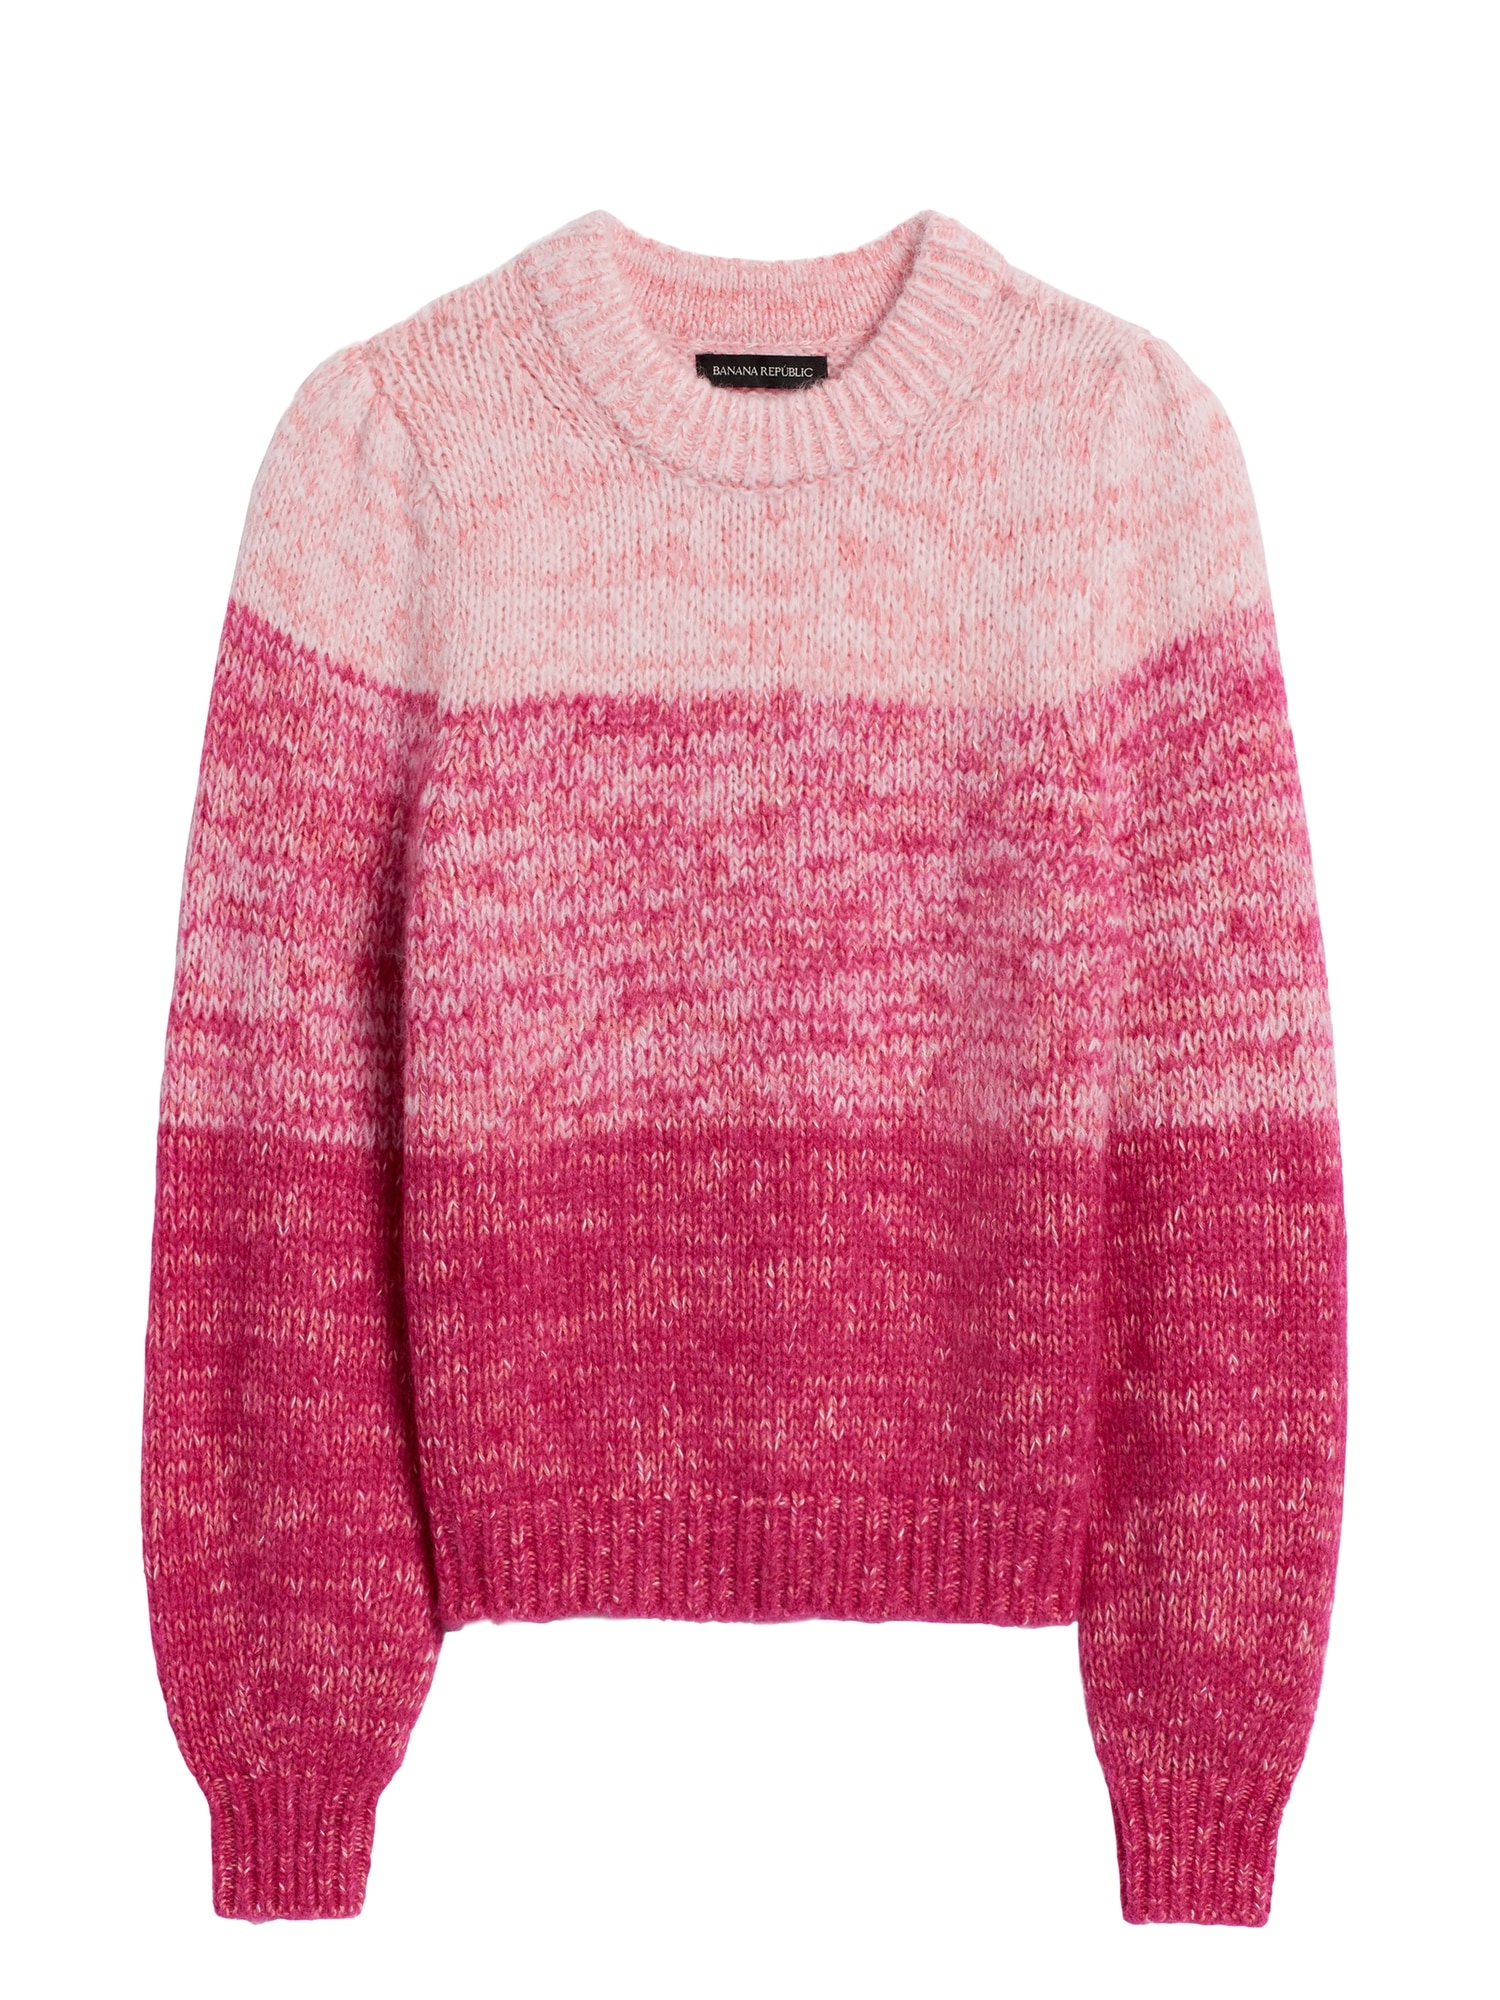 Cropped Ombré Sweater